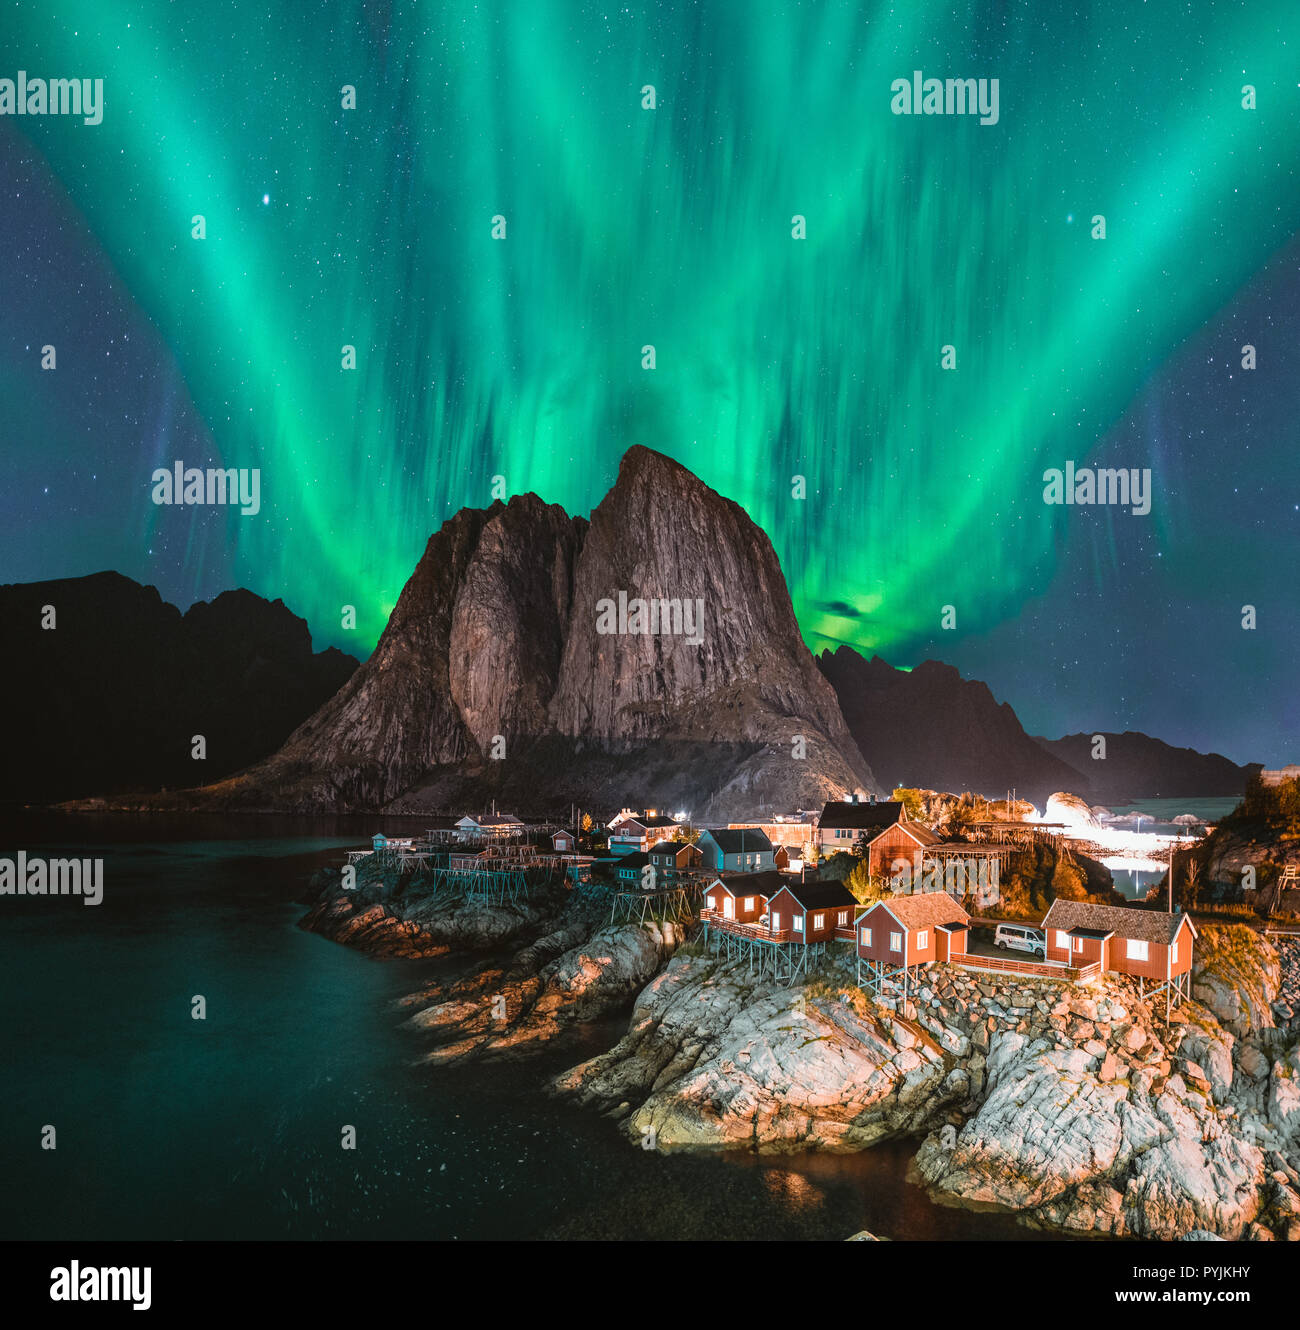 Remission Kenya Derfor Northern Lights Aurora Borealis with classic view of the fisherman s  village of Hamnoy, near Reine in Norway, Lofoten islands. This shot is  powered by Stock Photo - Alamy